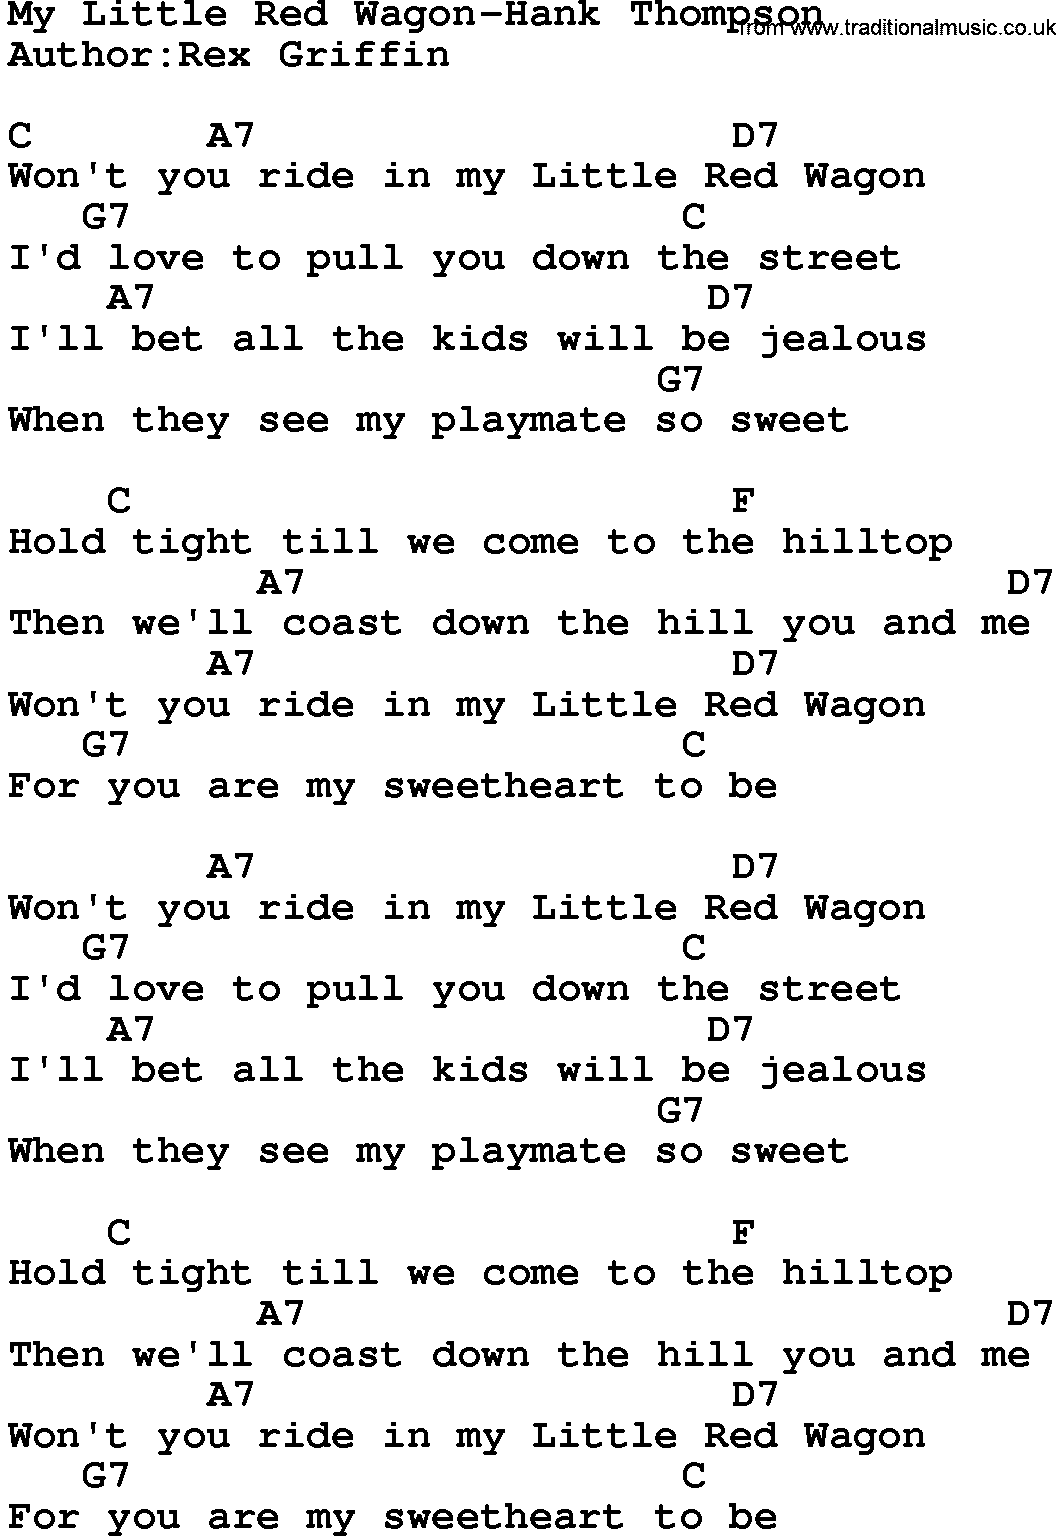 Country music song: My Little Red Wagon-Hank Thompson lyrics and chords